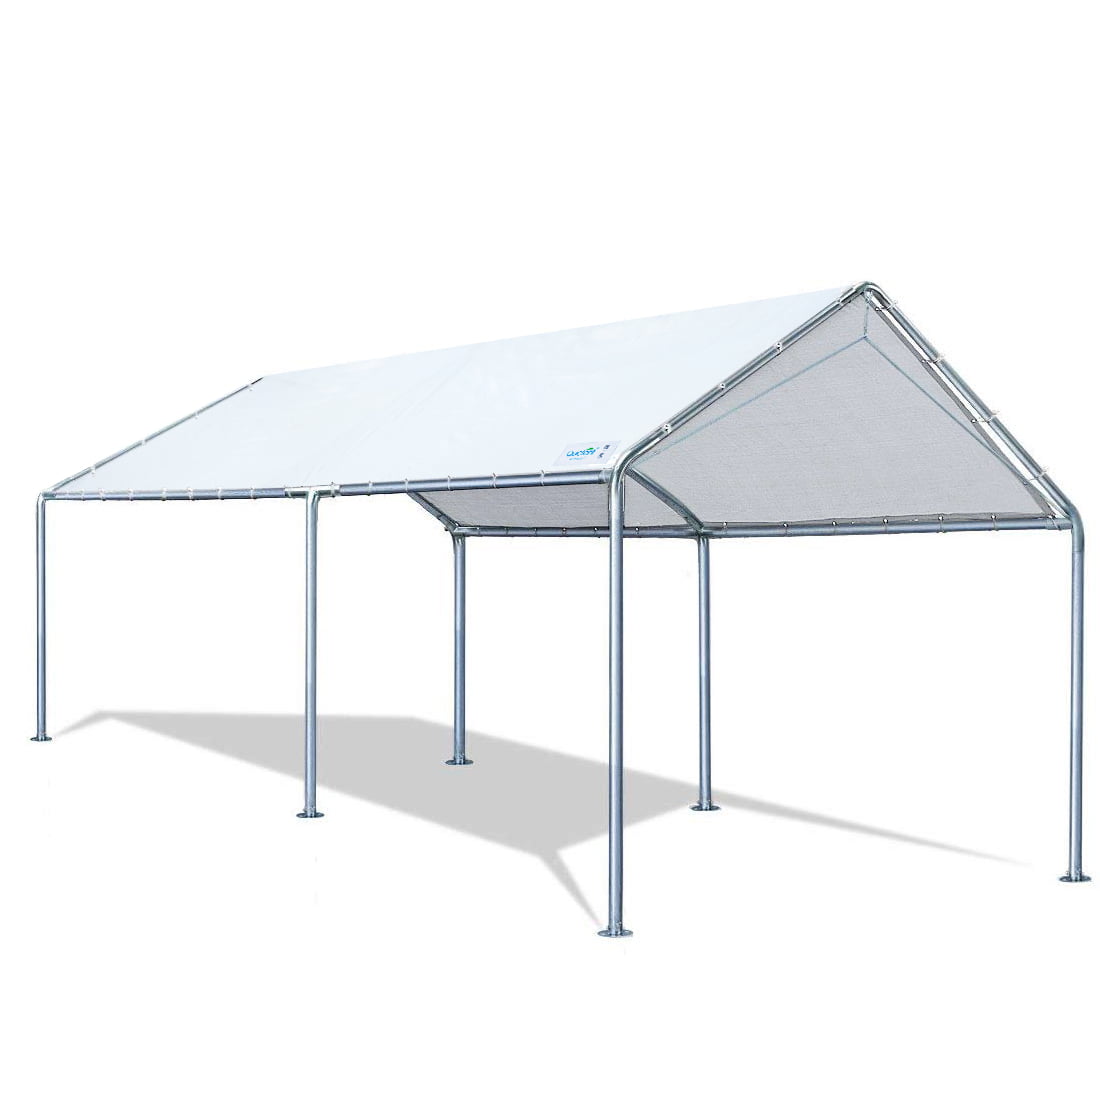 Quictent® 20'x10' Heavy Duty Garage Carport Car Shelter Canopy Party Tent White 